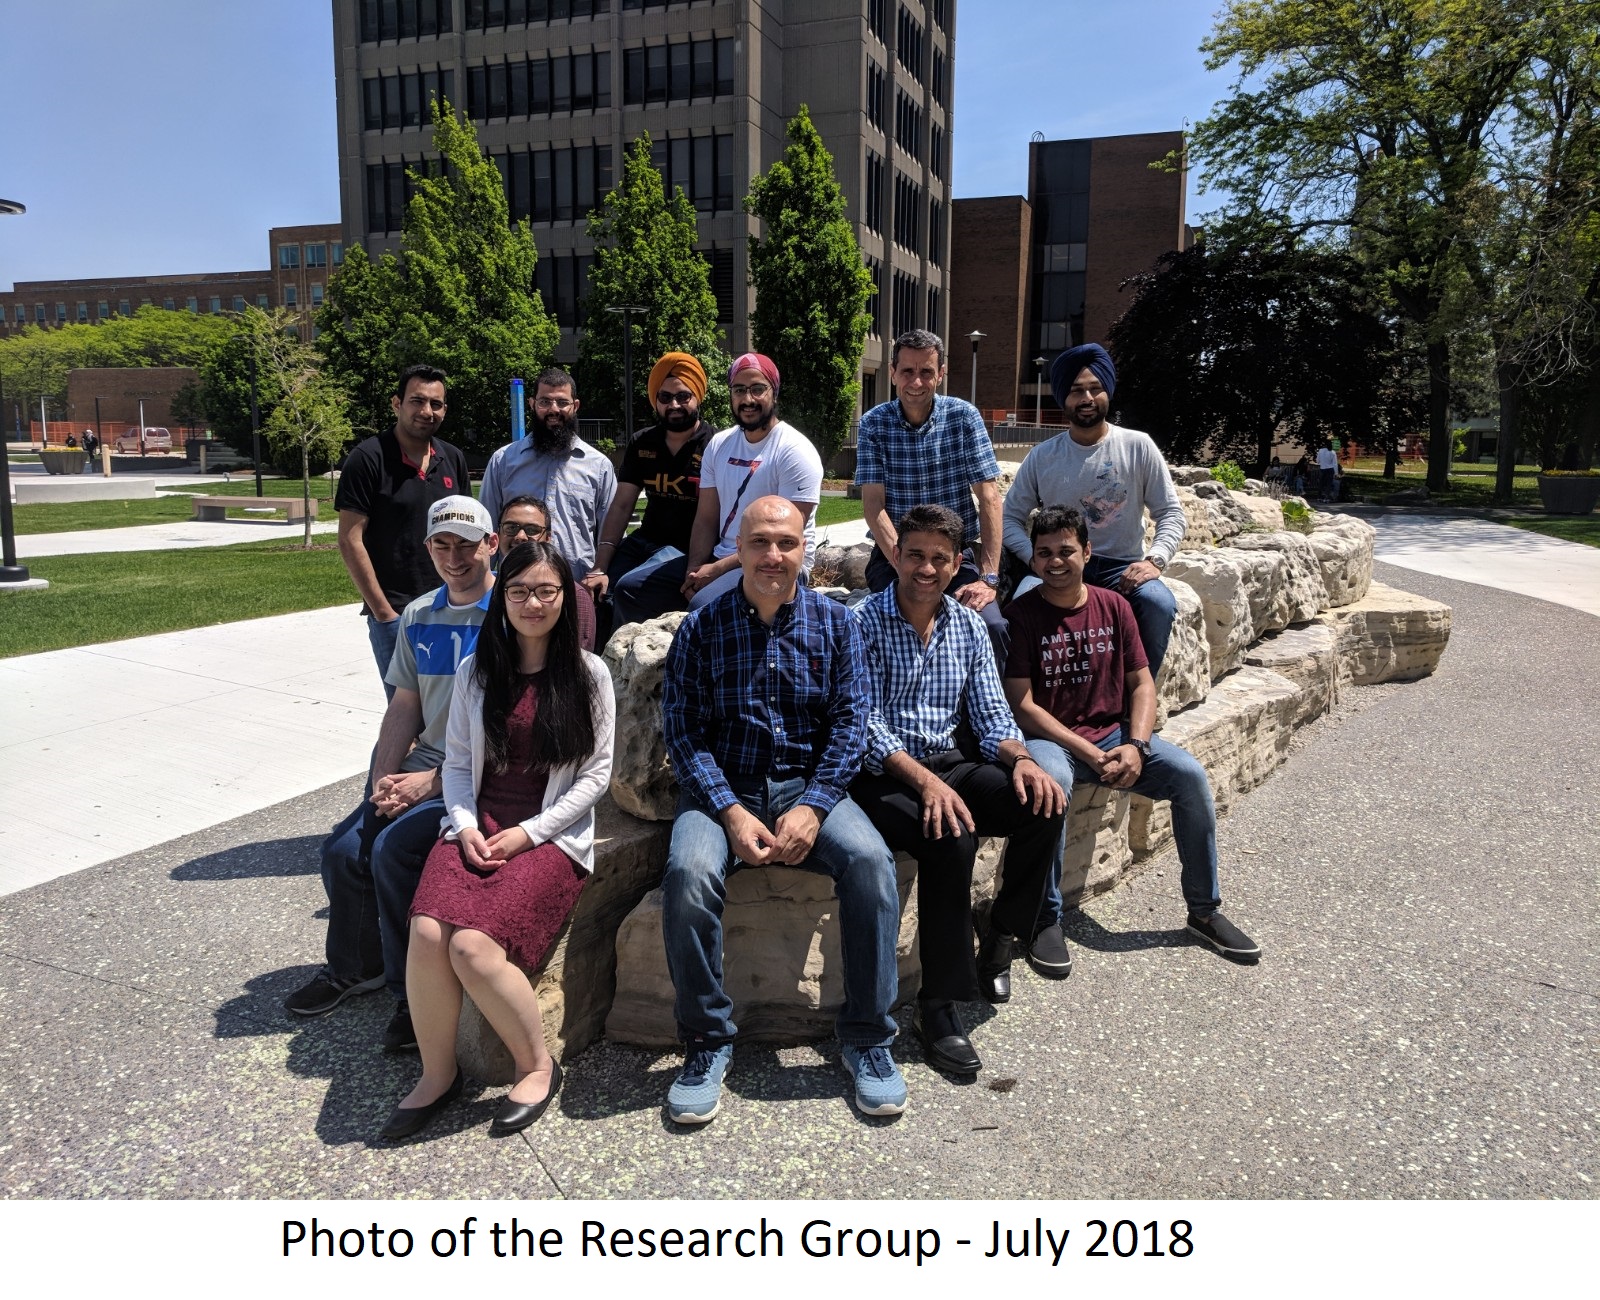 Research Group Photo